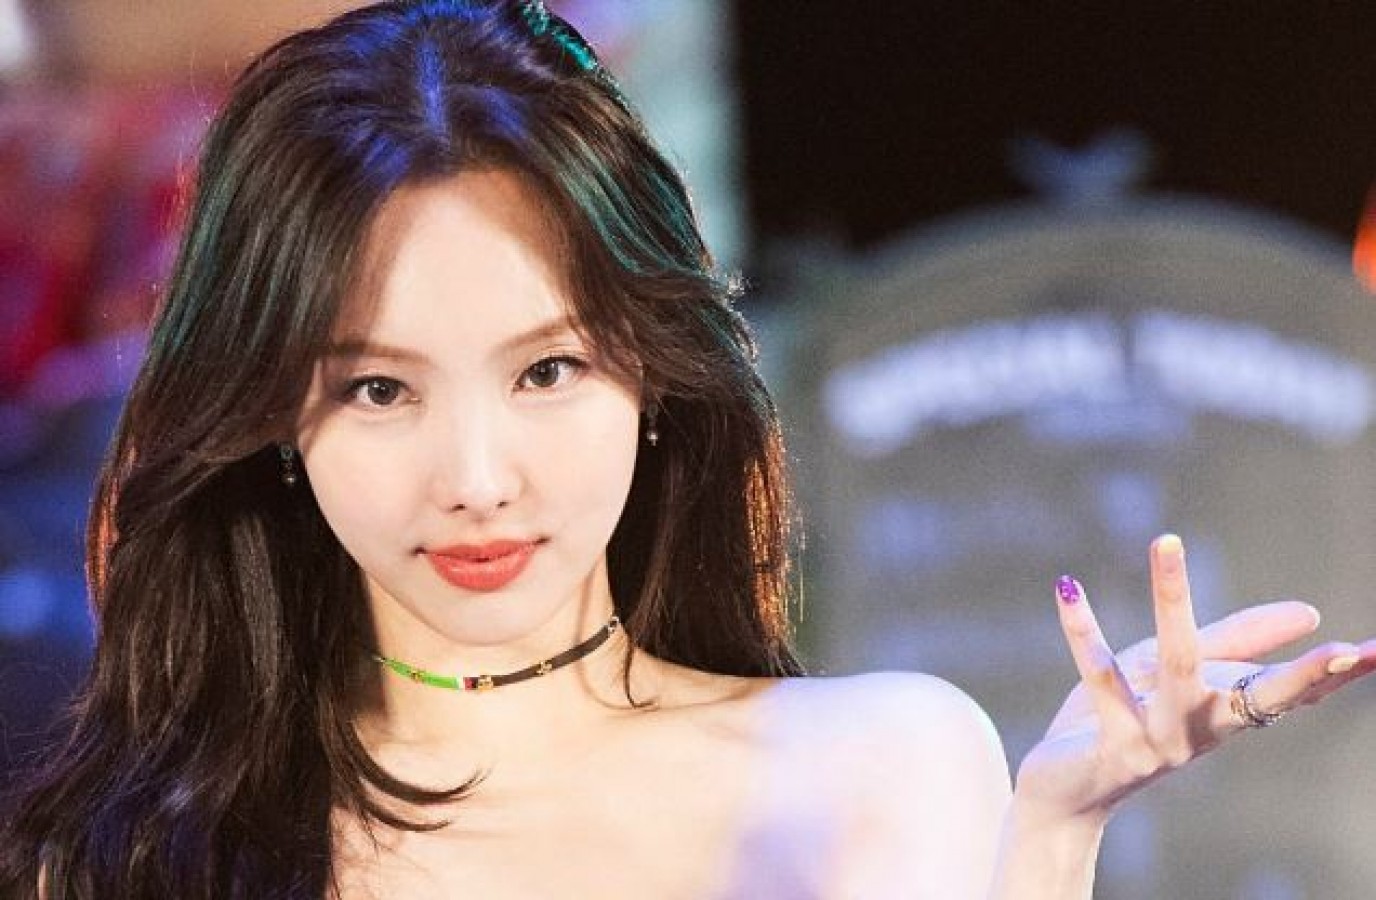 Pop' review: Twice member Nayeon's debut solo single is a positive